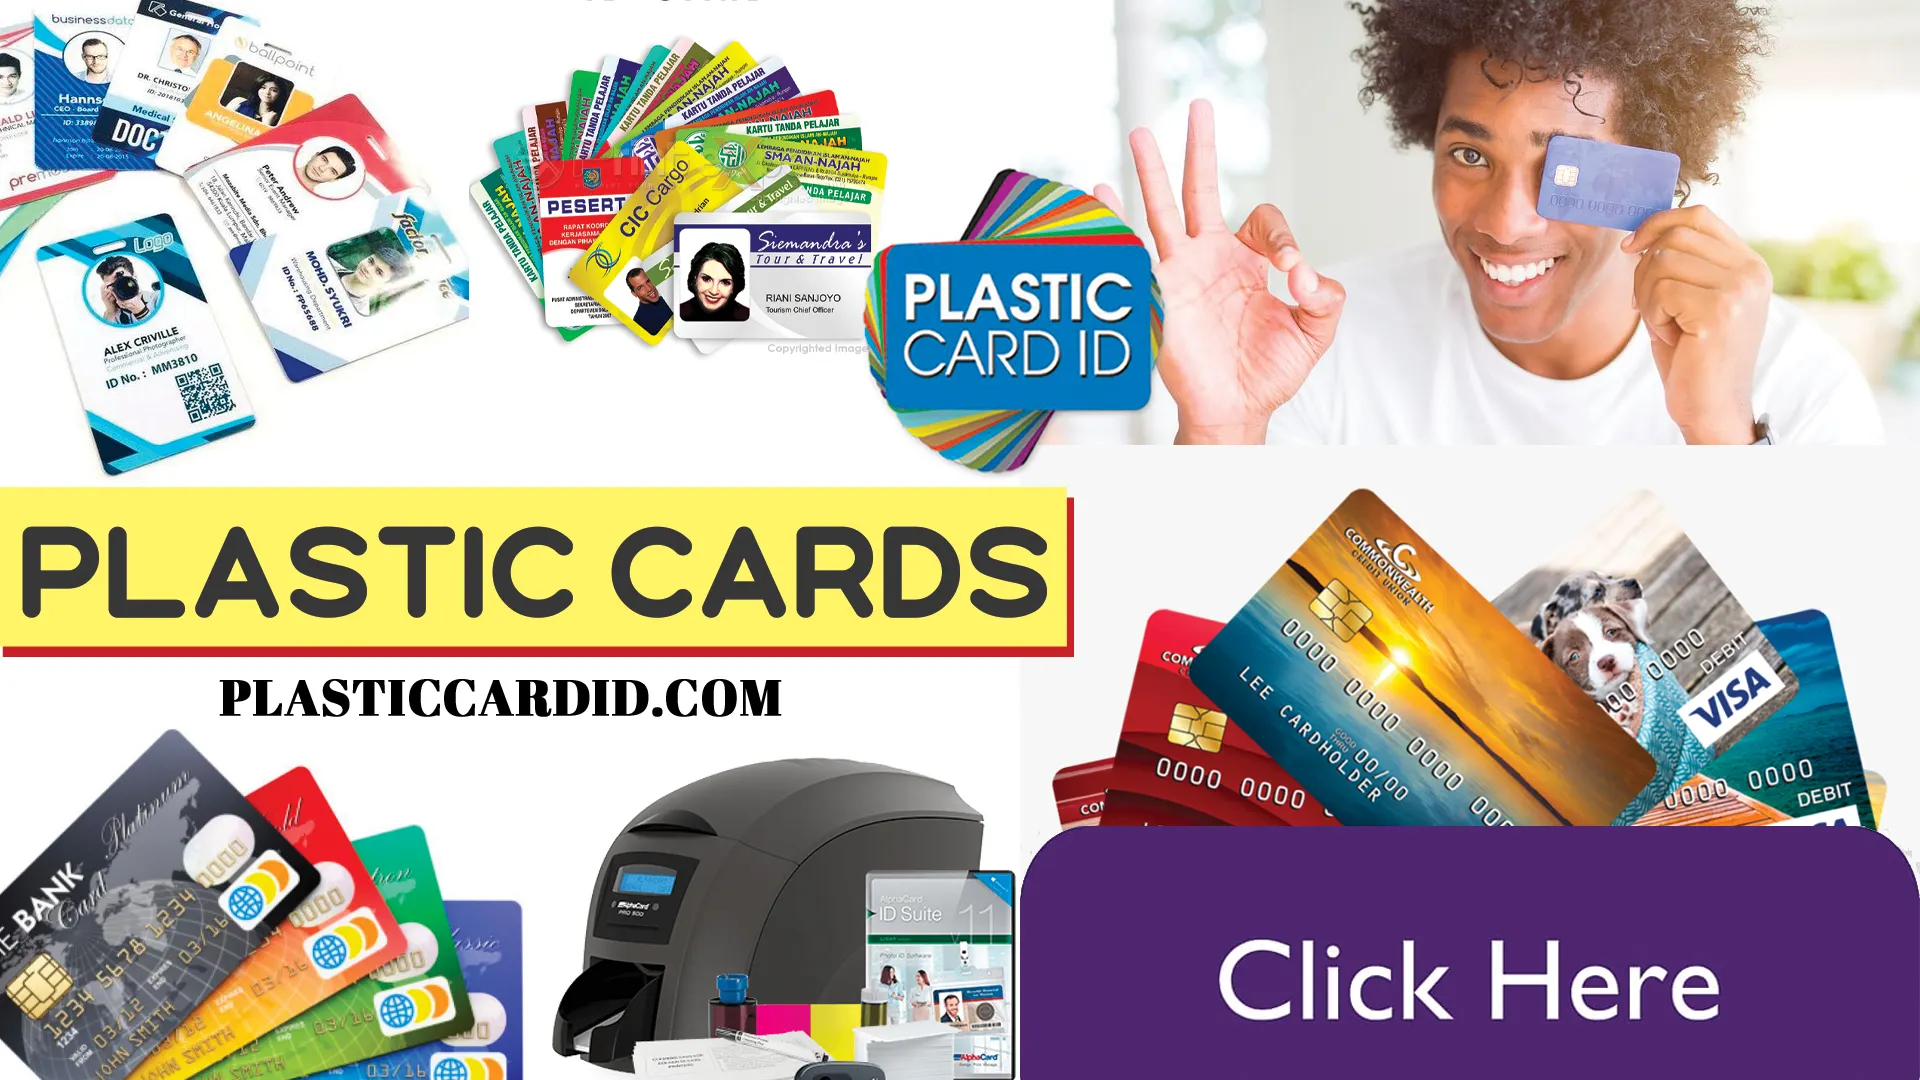 The Correct Way to Clean and Disinfect Your Plastic Cards